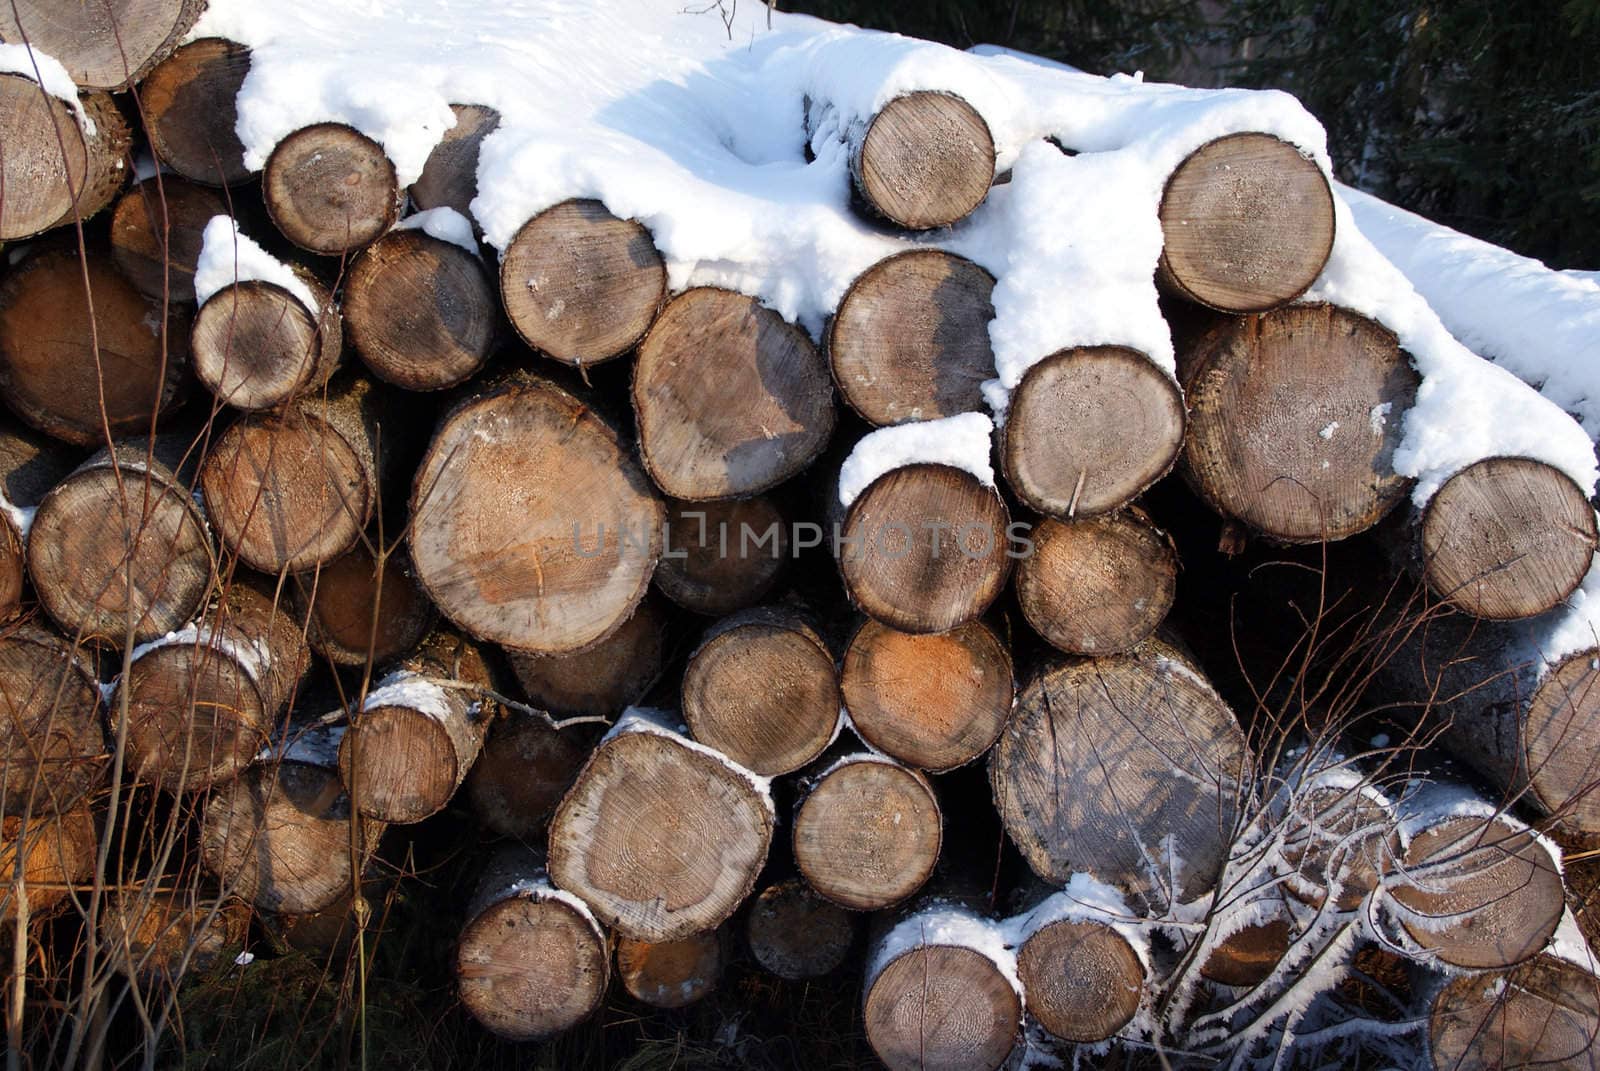 A stack of firewood in winter, suitable for background. Photographed in Salo, Finland.